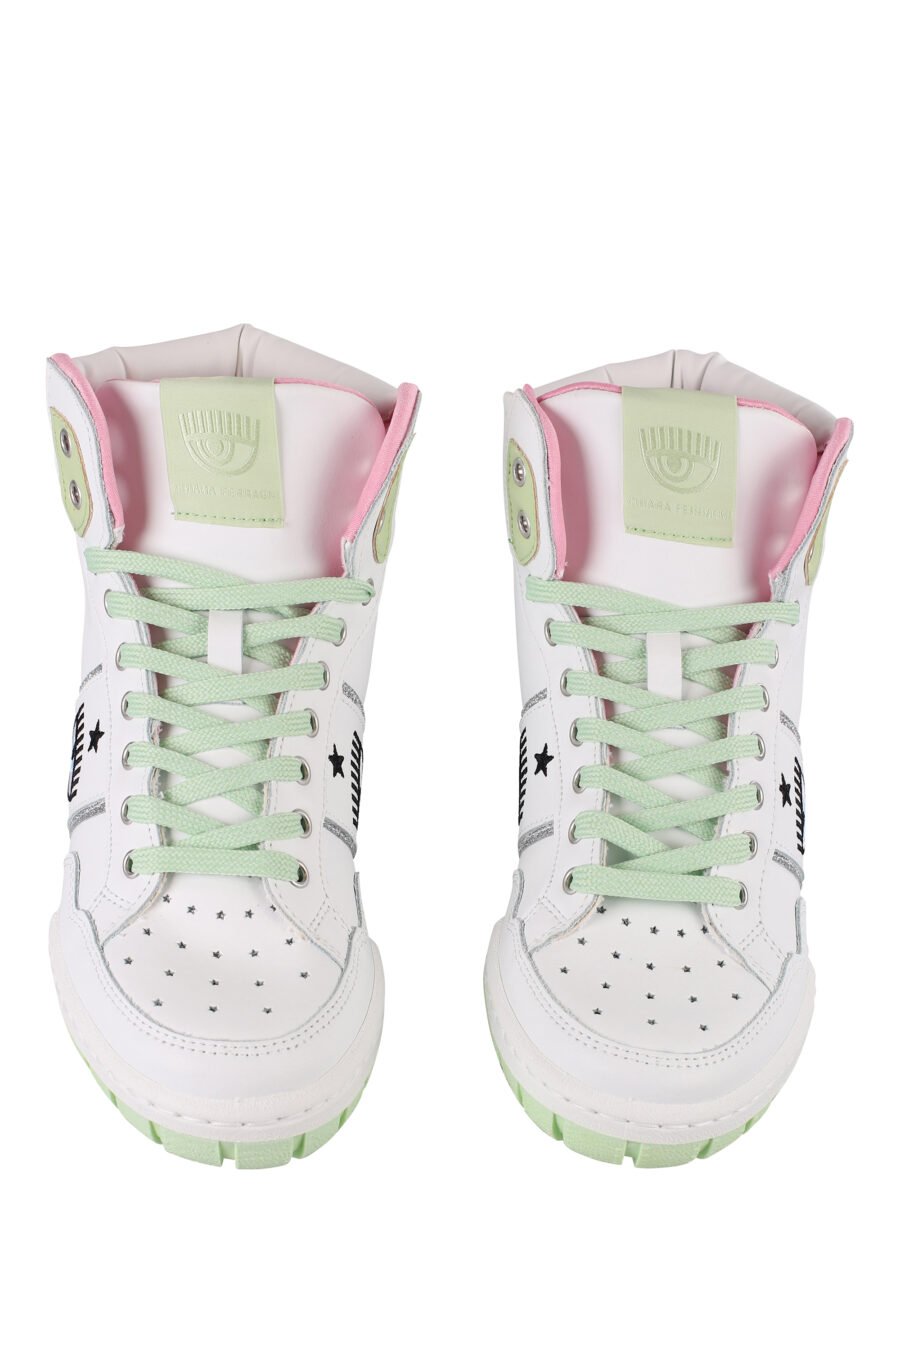 White and green trainers with eye logo and pink details - IMG 1228